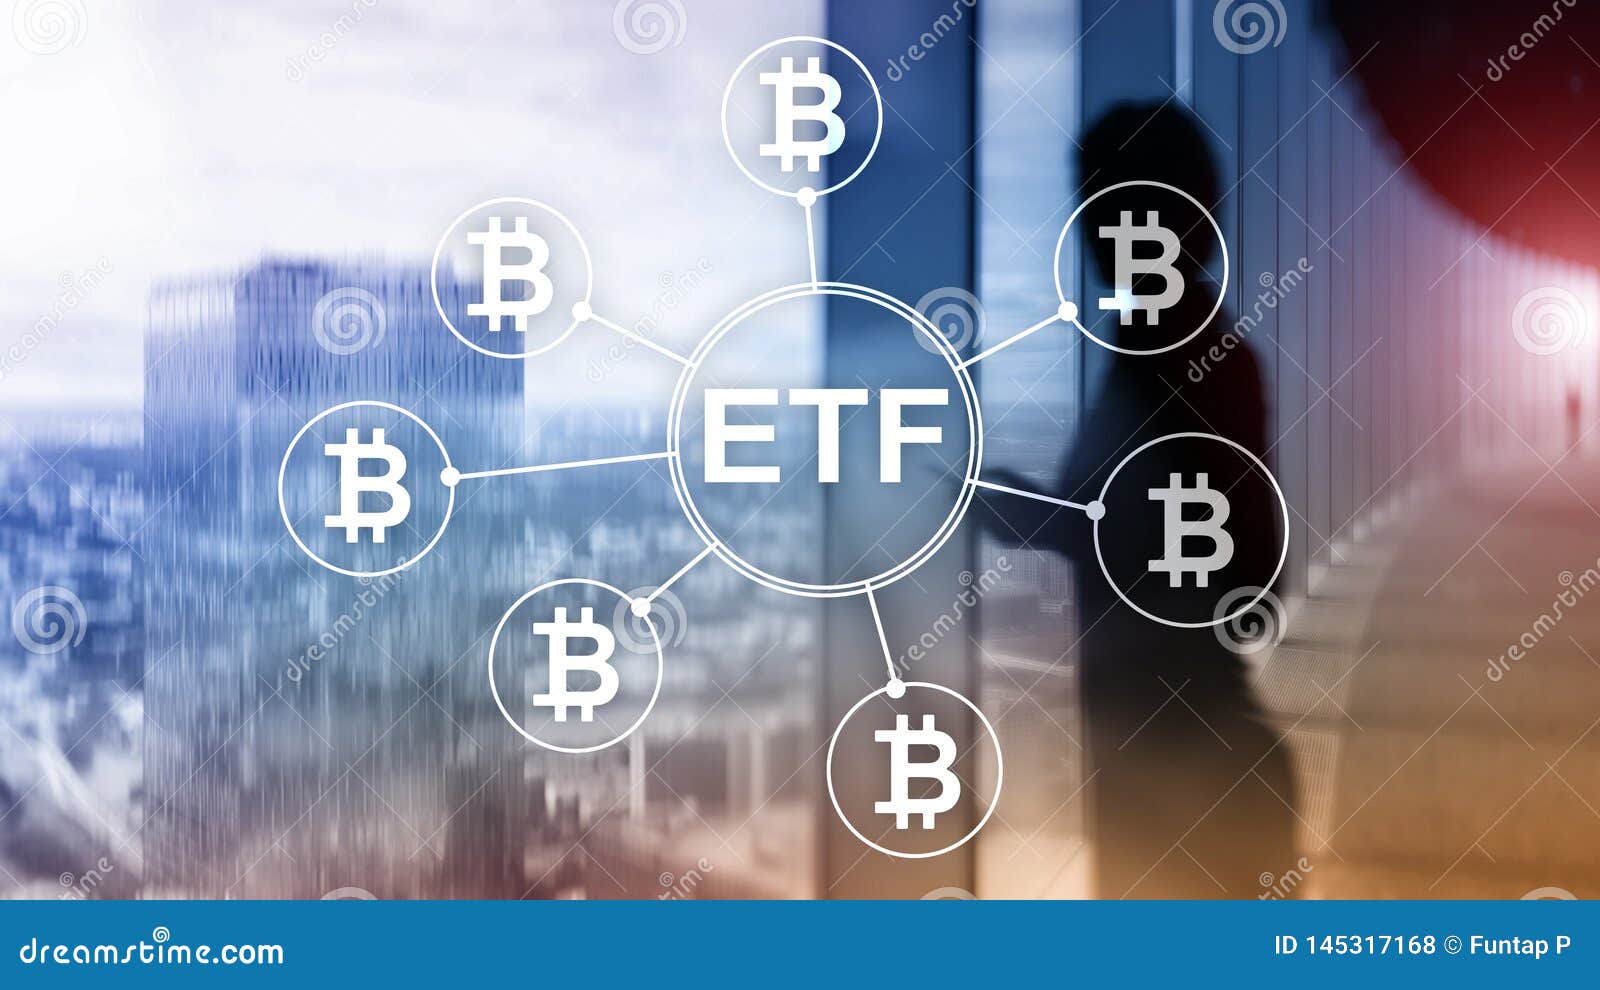 etf with bitcoin exposure